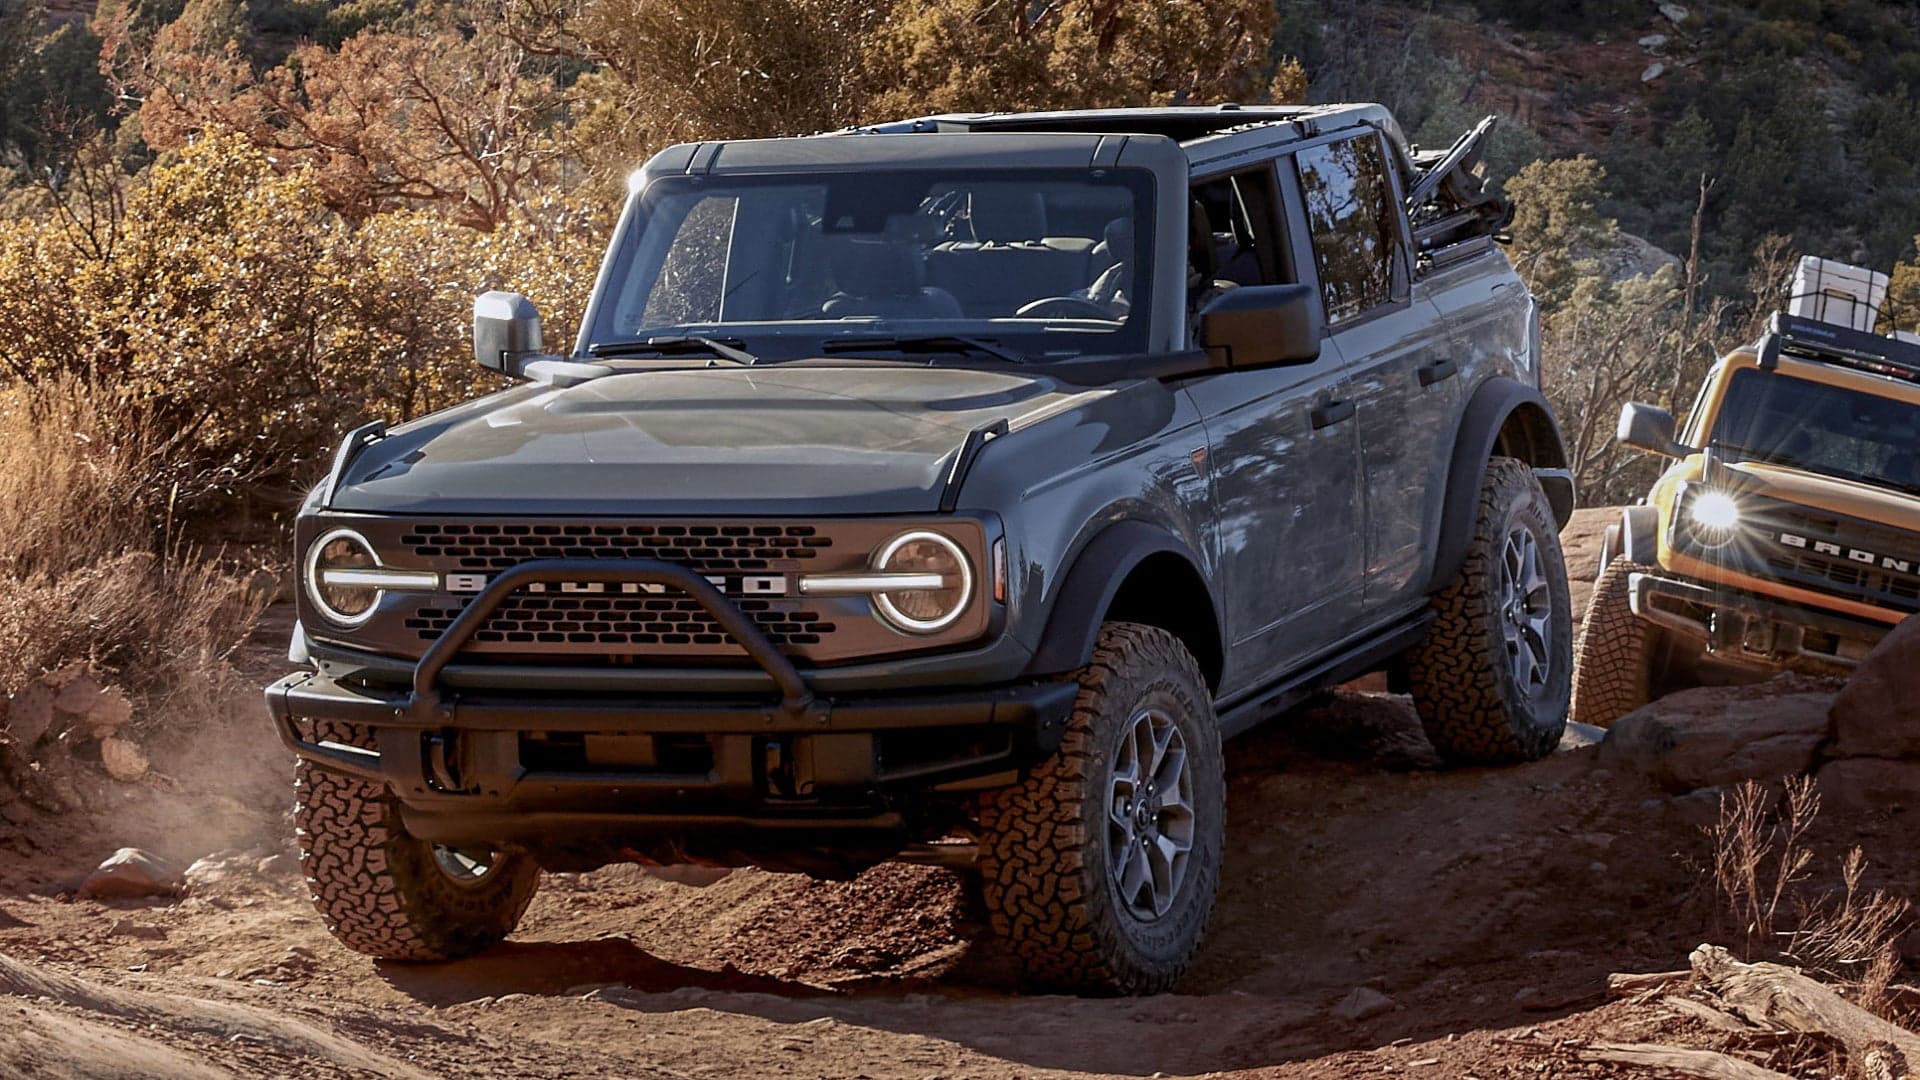 Rumored Ford Bronco Pickup Canceled: Report